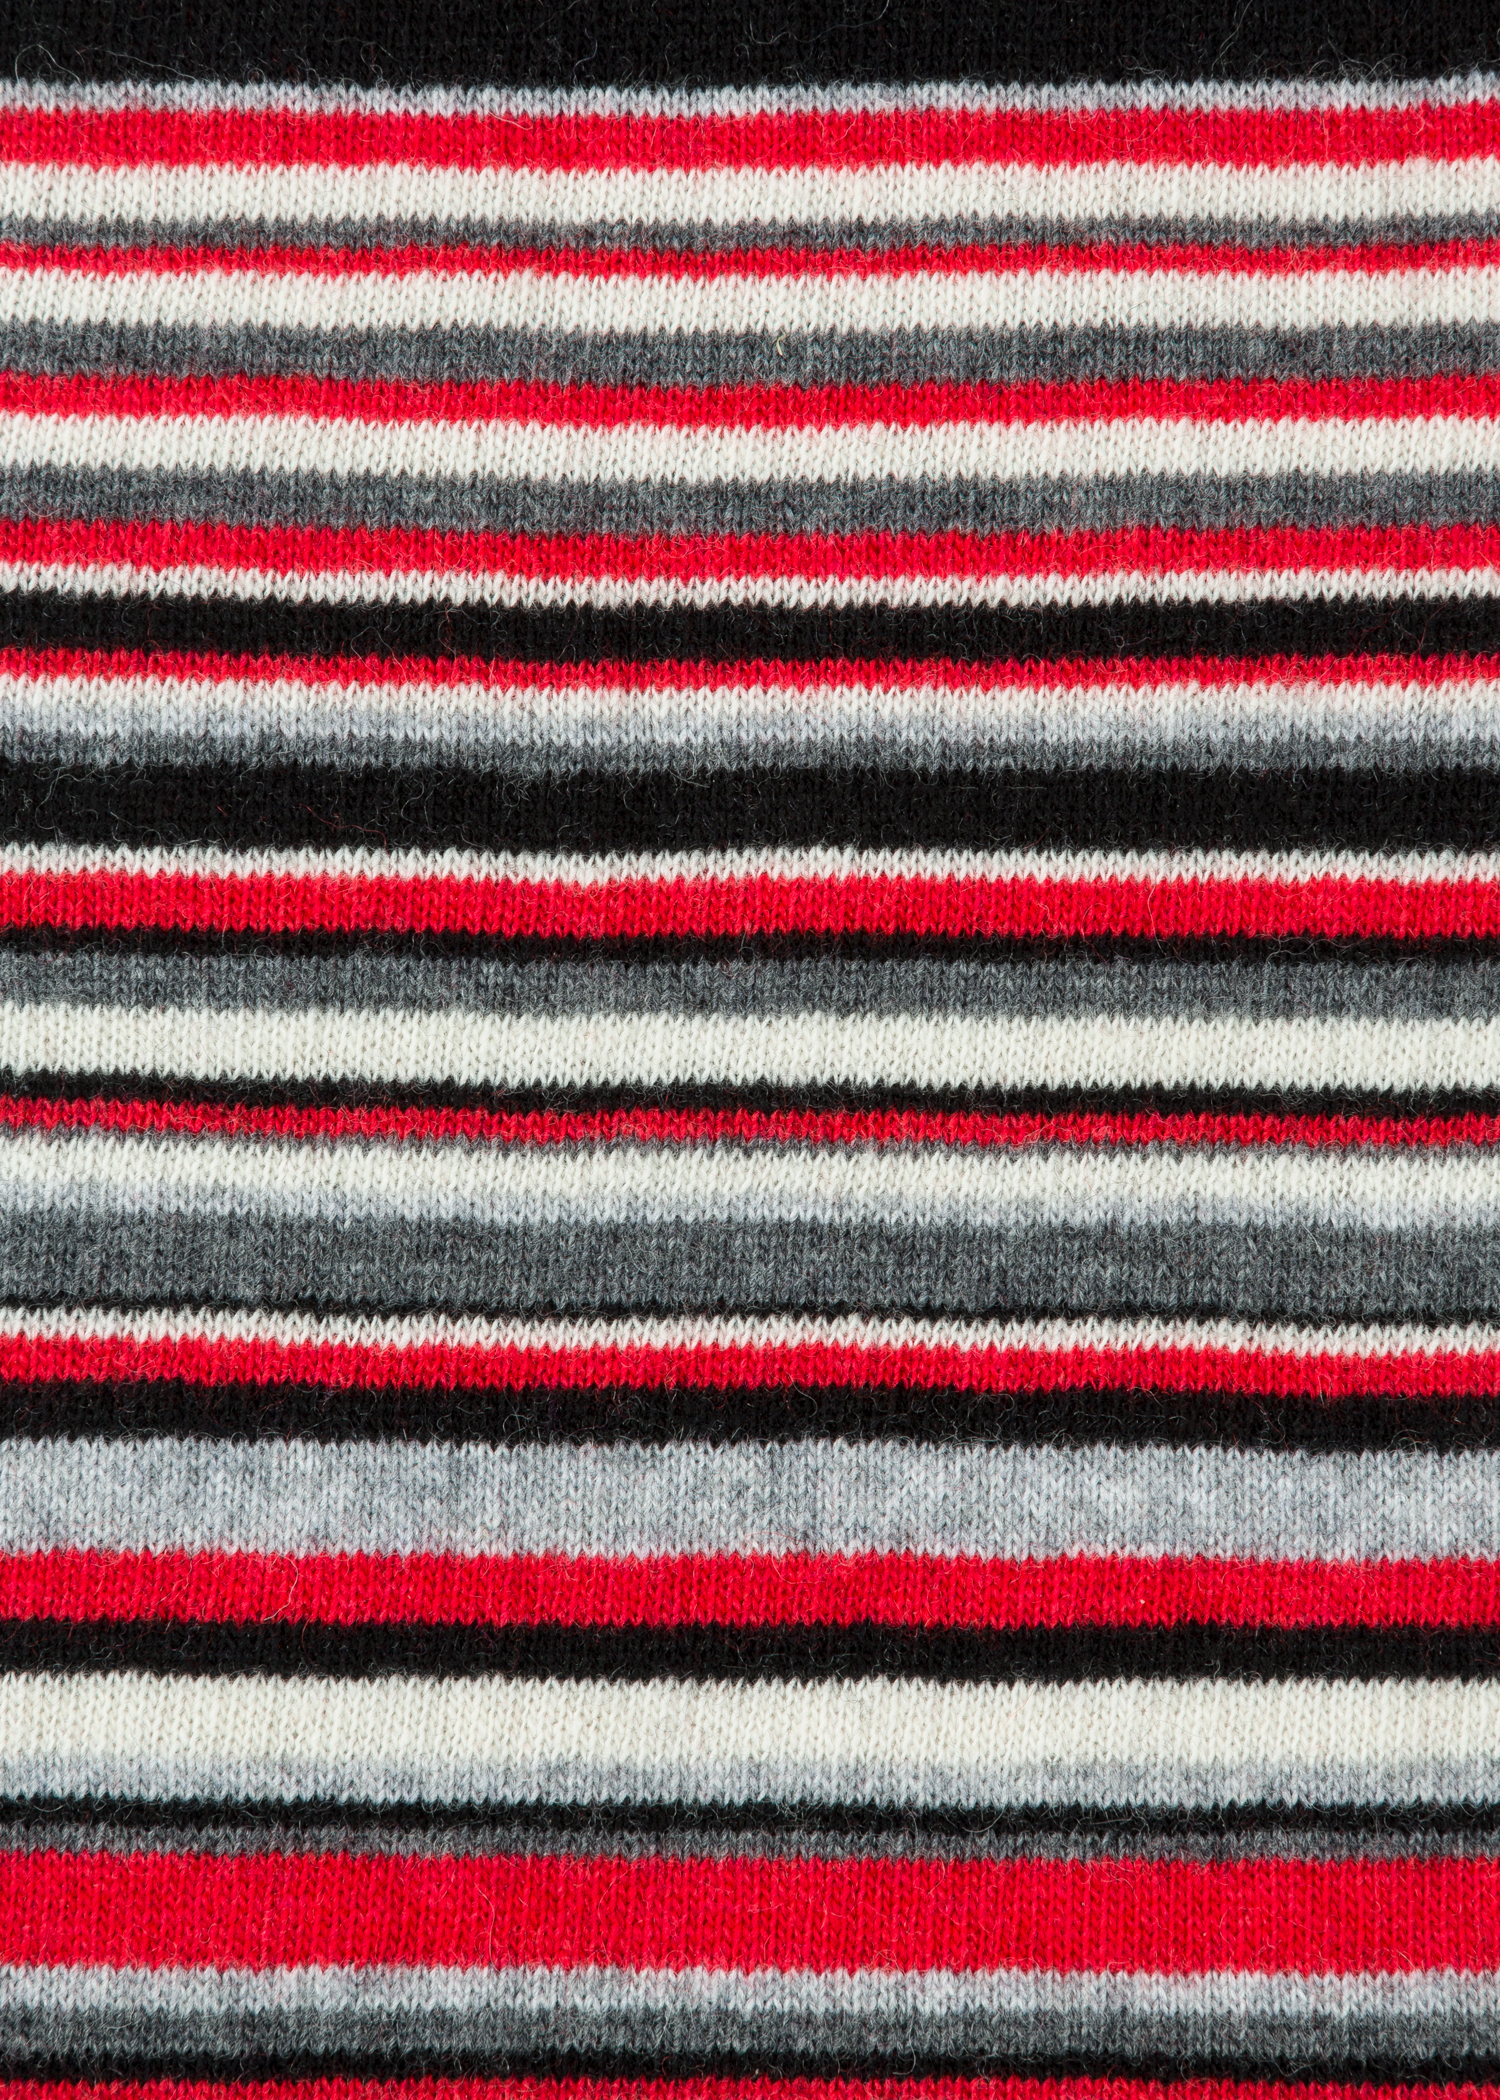 Fabric swatch - Paul Smith X Manchester United – Red Striped Wool/Cashmere Scarf Paul Smith